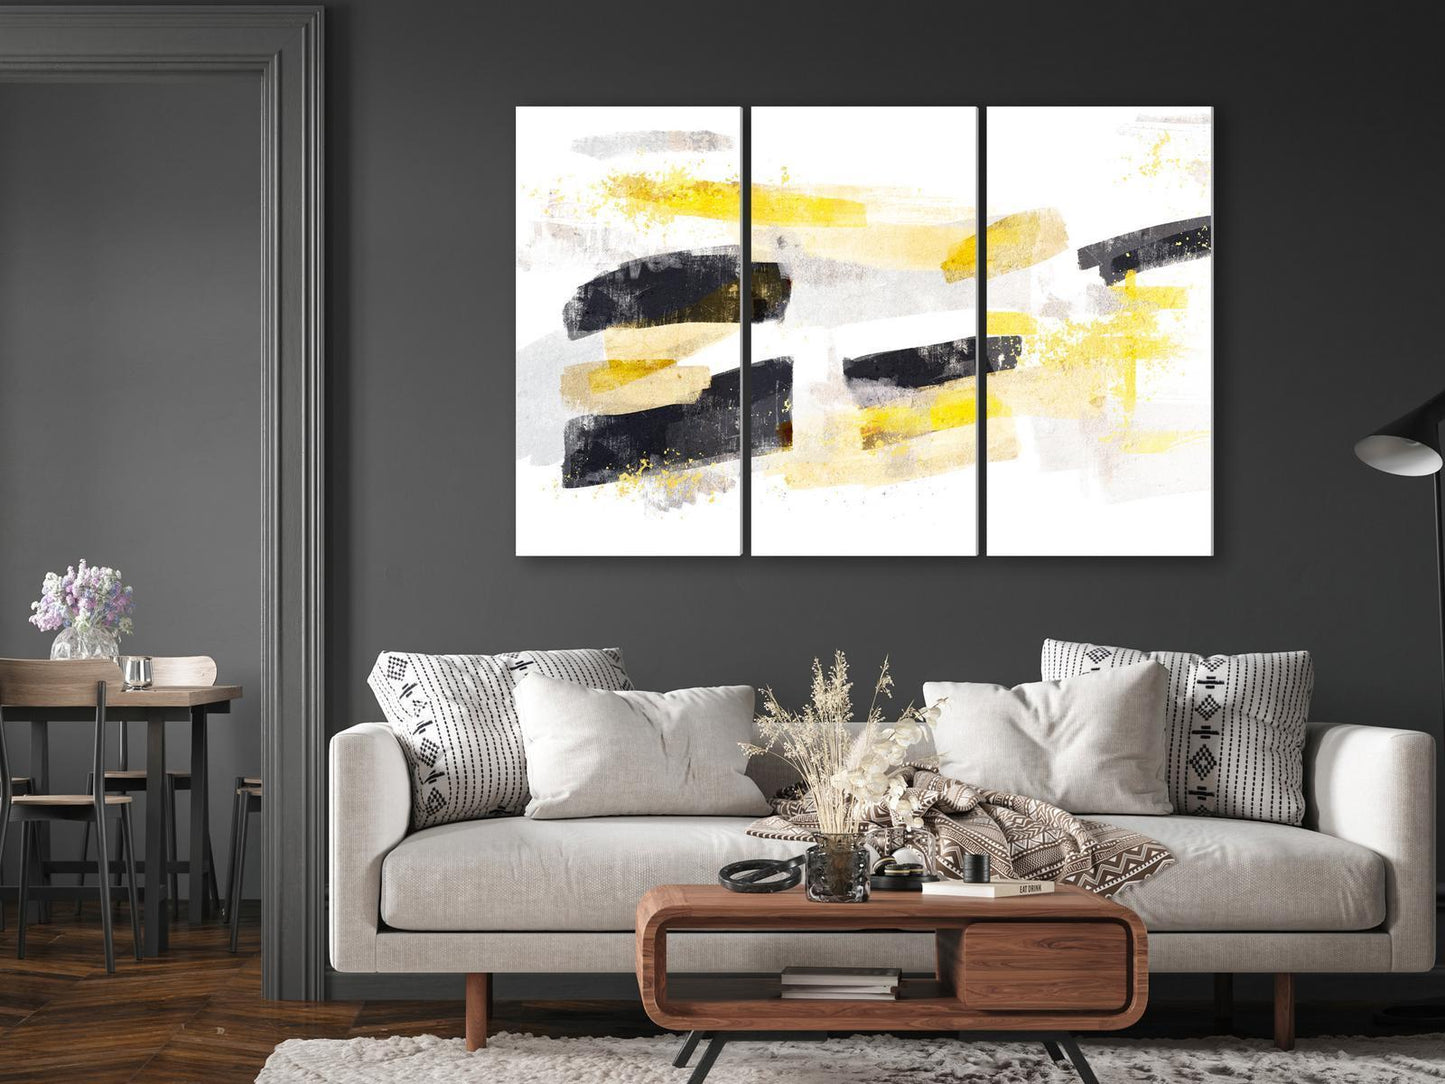 Painting - Modern Chic (3 Parts)